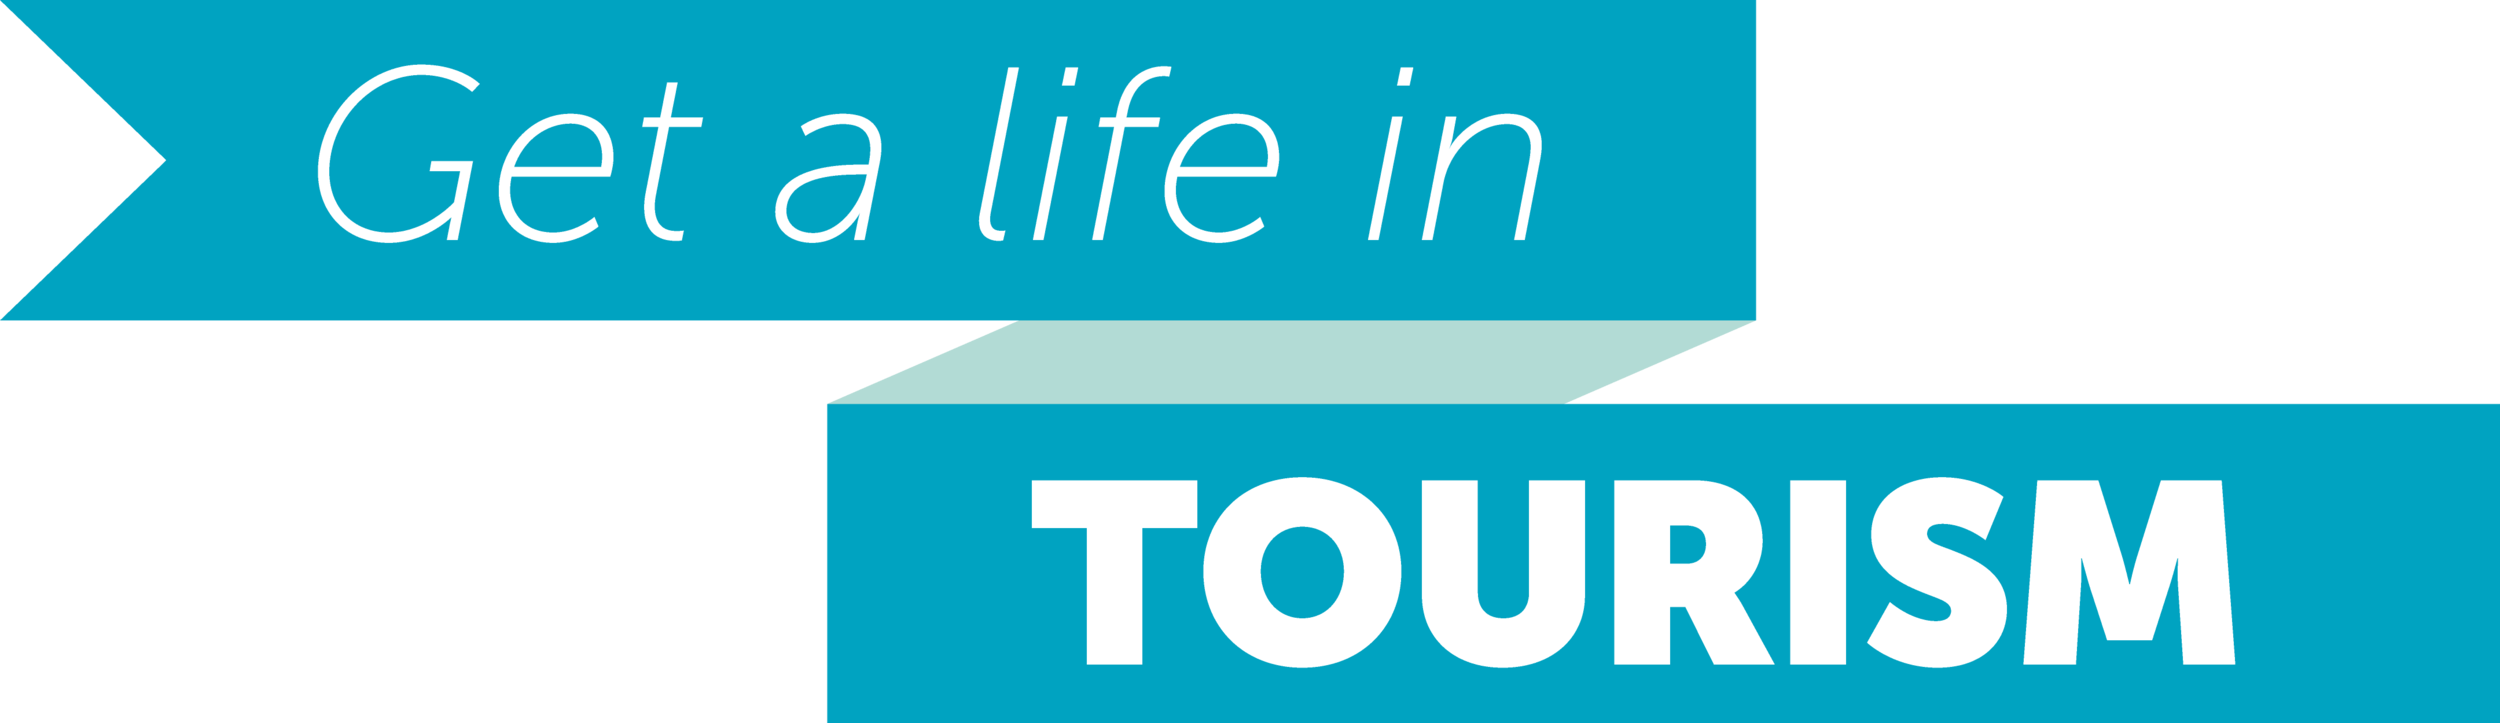 Get a Life in Tourism